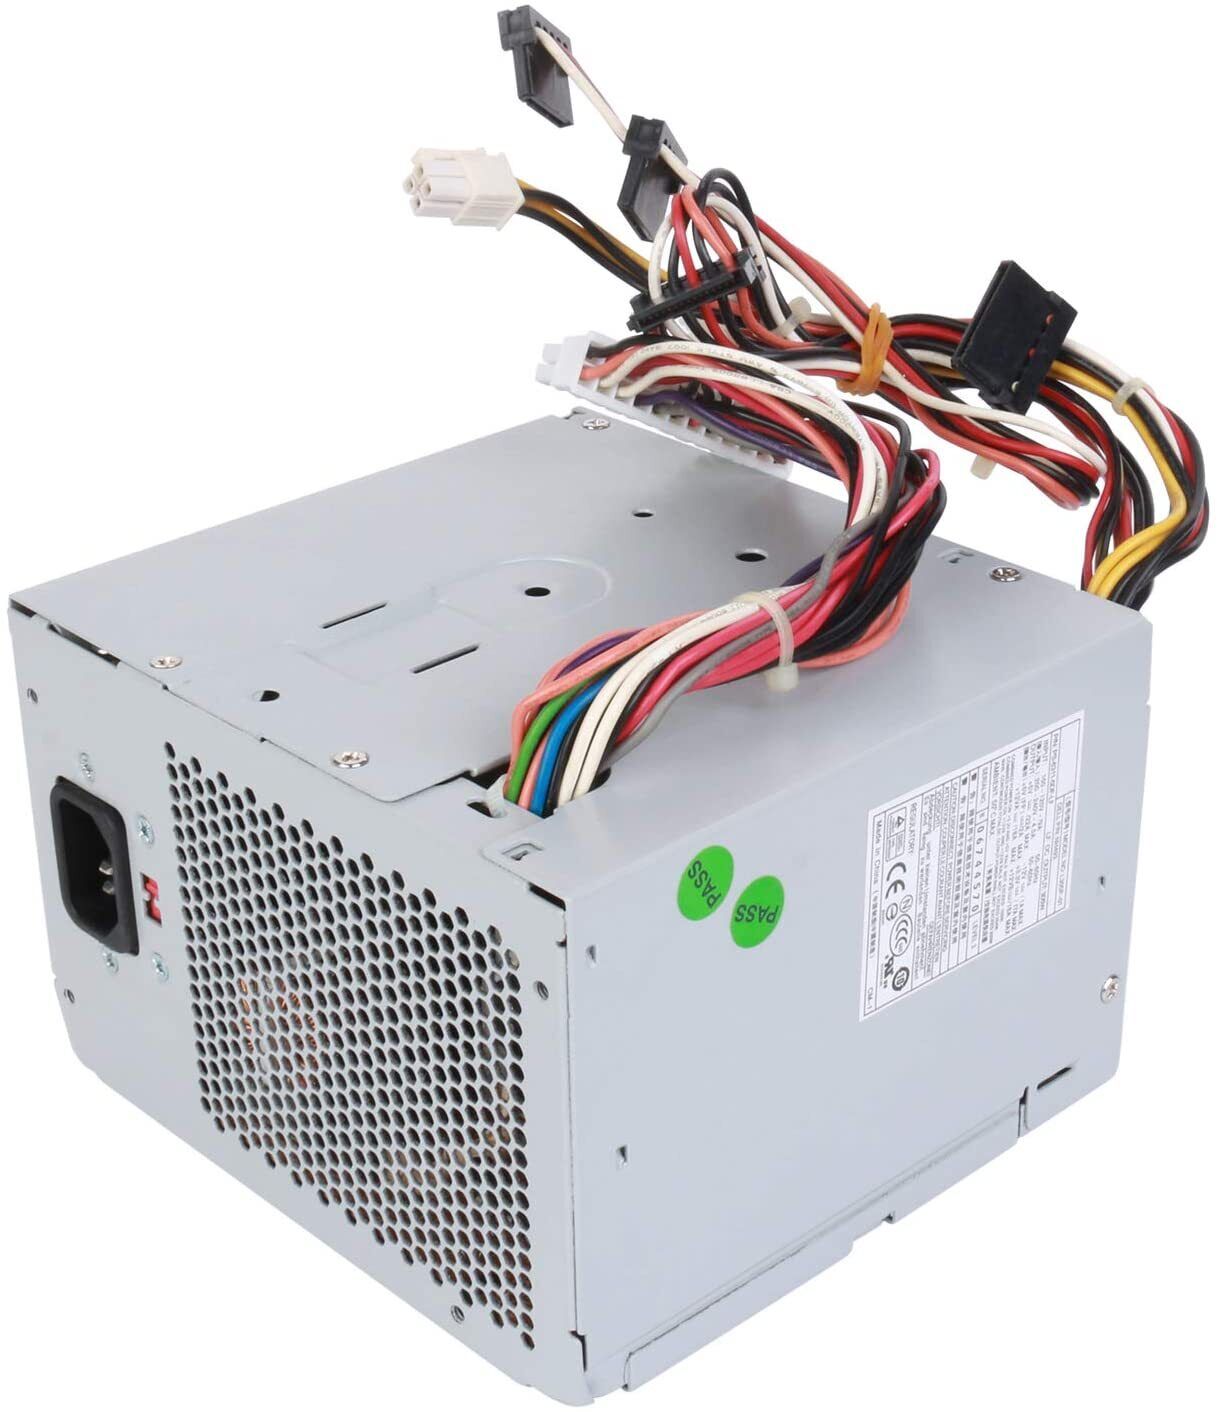 305W Power Supply for Dell L305P-01,PS-6311-5DF-LF,N305P-06,F305P-00 MK9GY X812